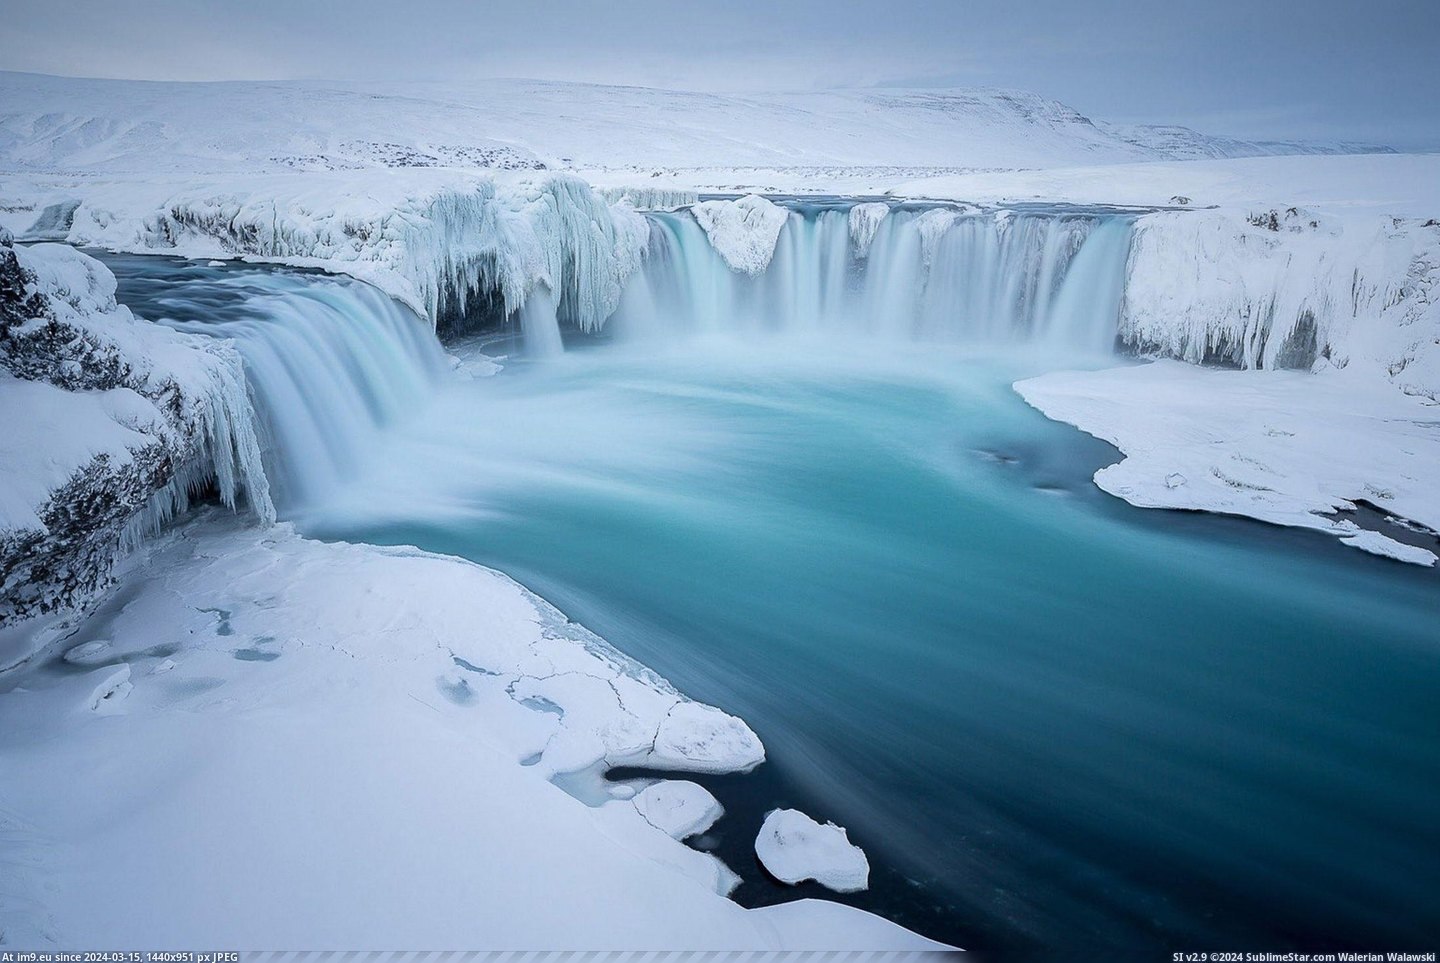 #Wallpaper #Beautiful #Wide #Gods #Afoss #Holko #Iceland #Waterfall #Joshua [Earthporn] 'Waterfall of the Gods': Goðafoss, Iceland [1297x1463] by Joshua Holko Pic. (Bild von album My r/EARTHPORN favs))